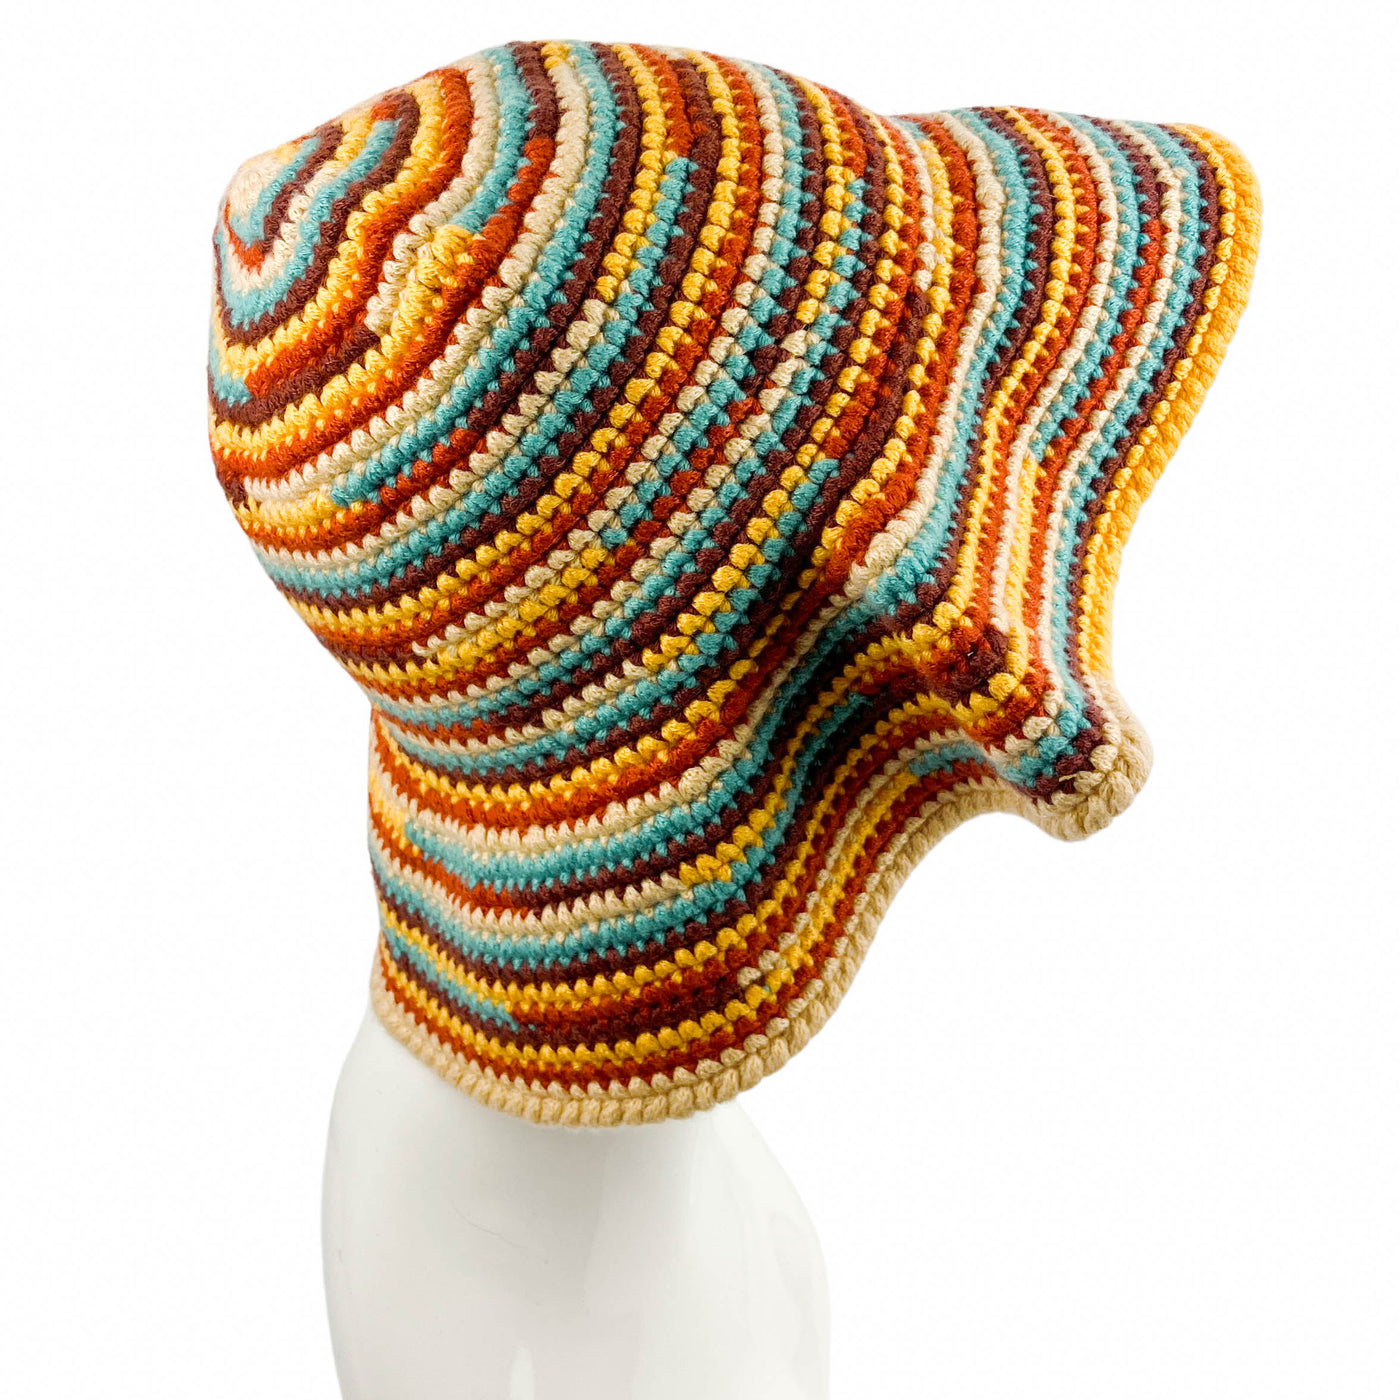 Canessa Striped Hat in Multi - Discounts on Canessa at UAL